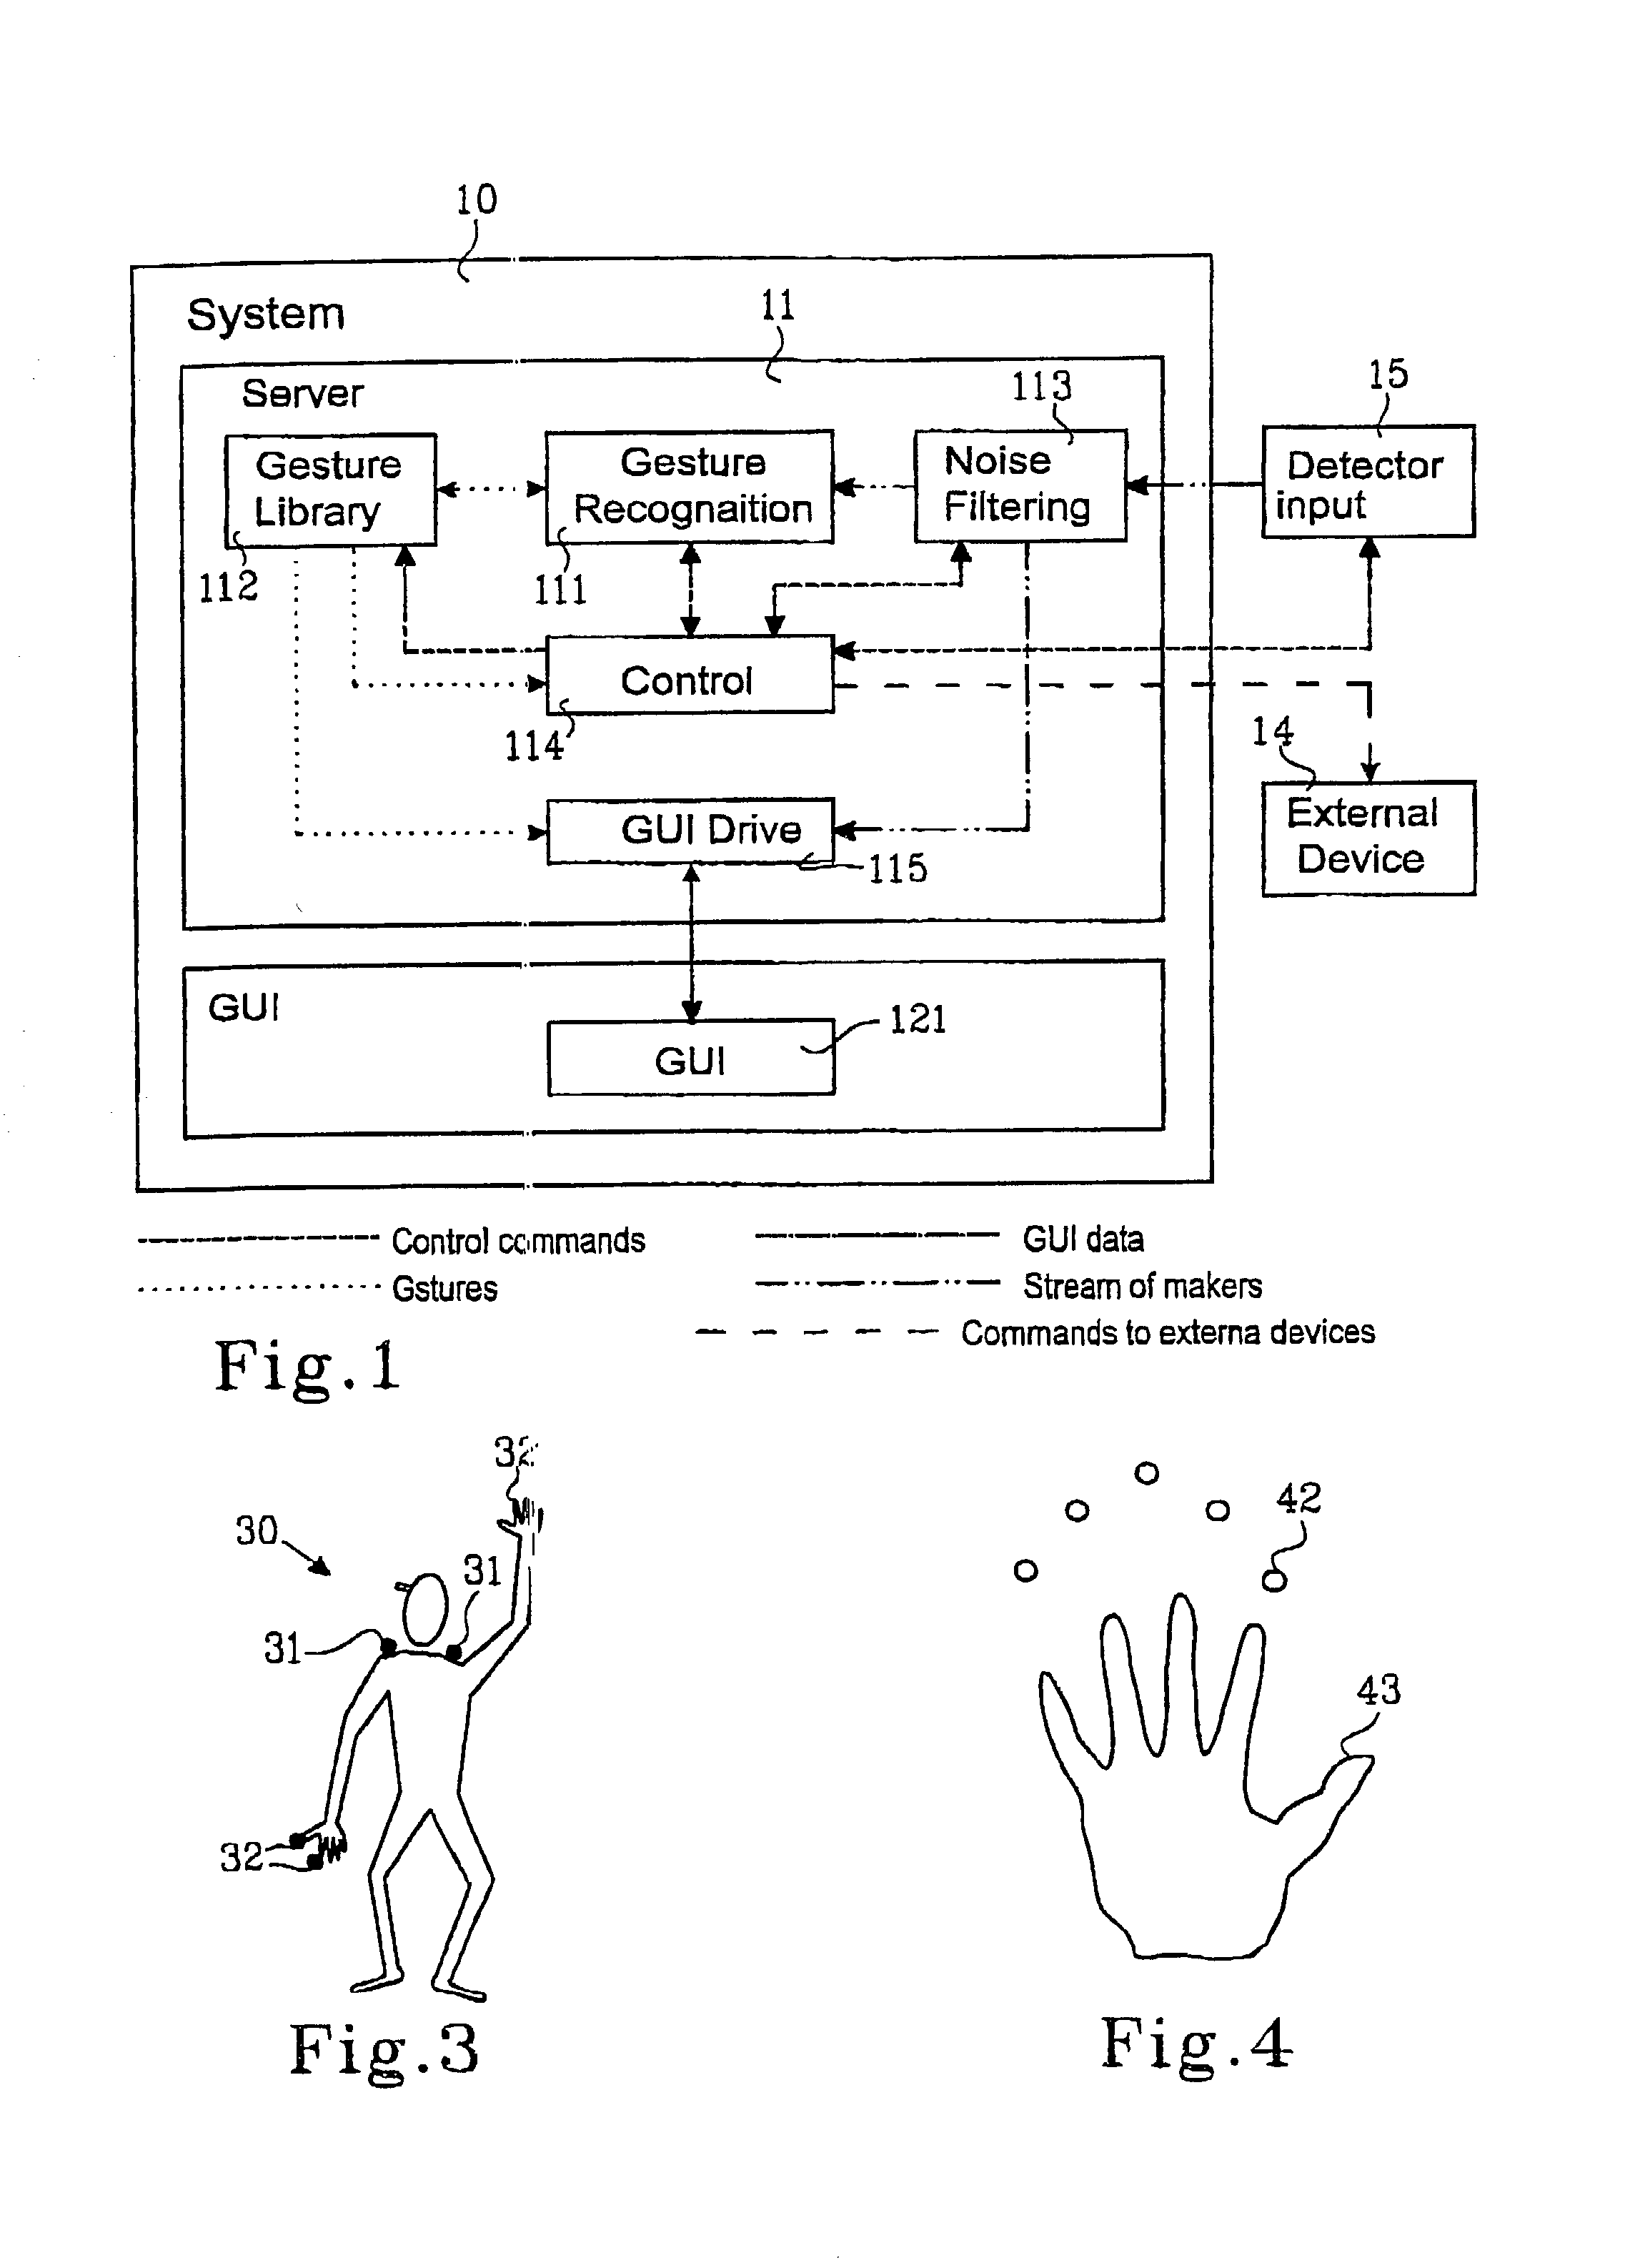 Gesture recognition system